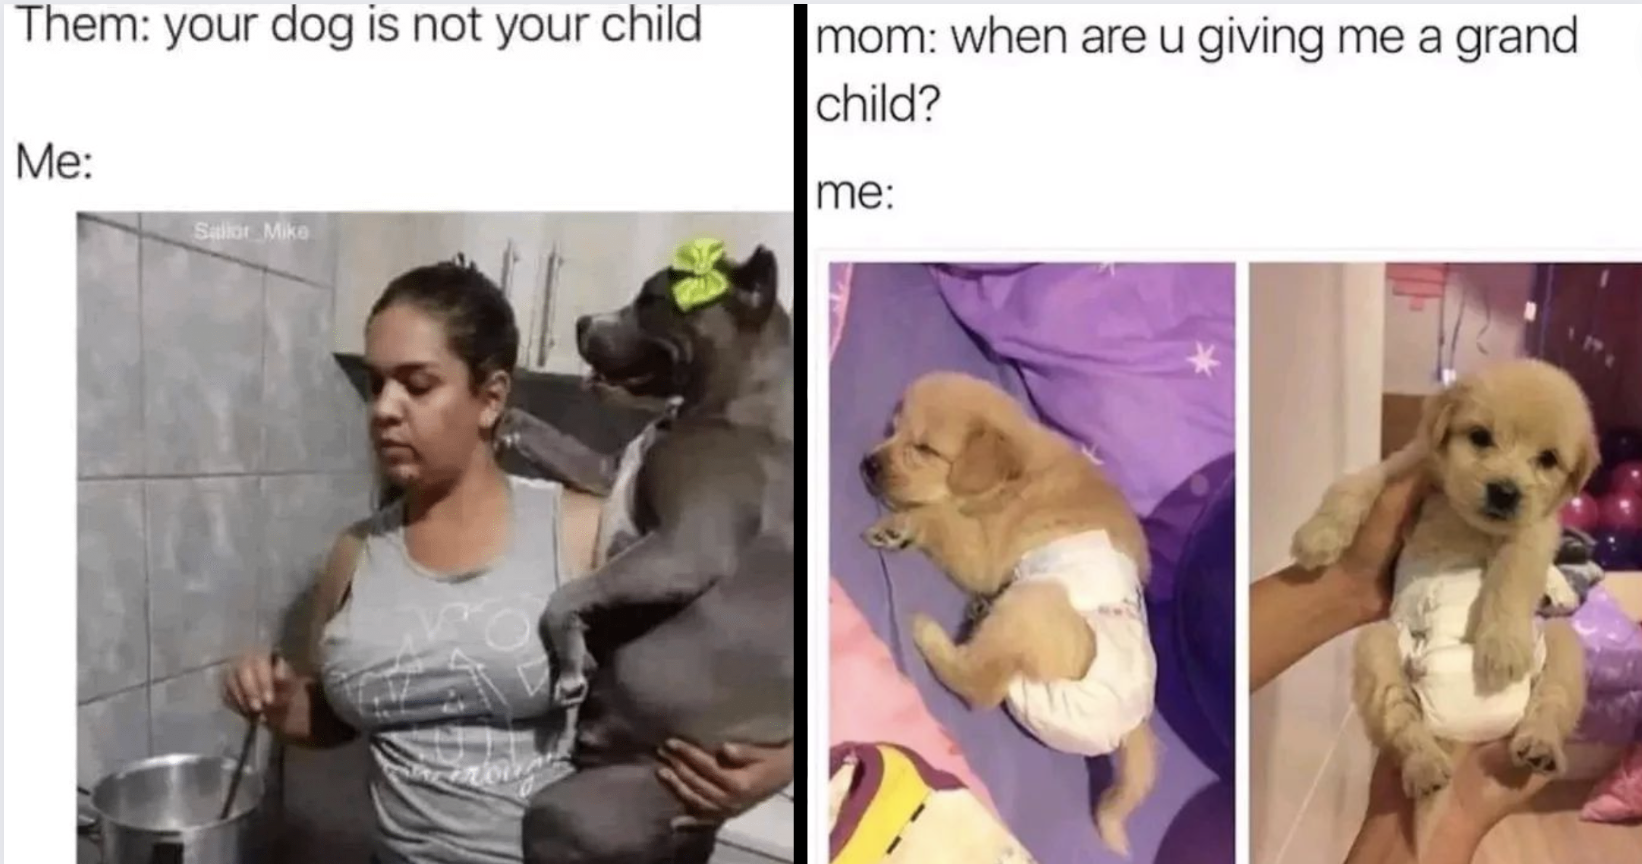 21 Very Funny Dog Memes For People Whose Dogs Are Their Literal Children -  Animal Comedy - Animal Comedy, funny animals, animal gifs